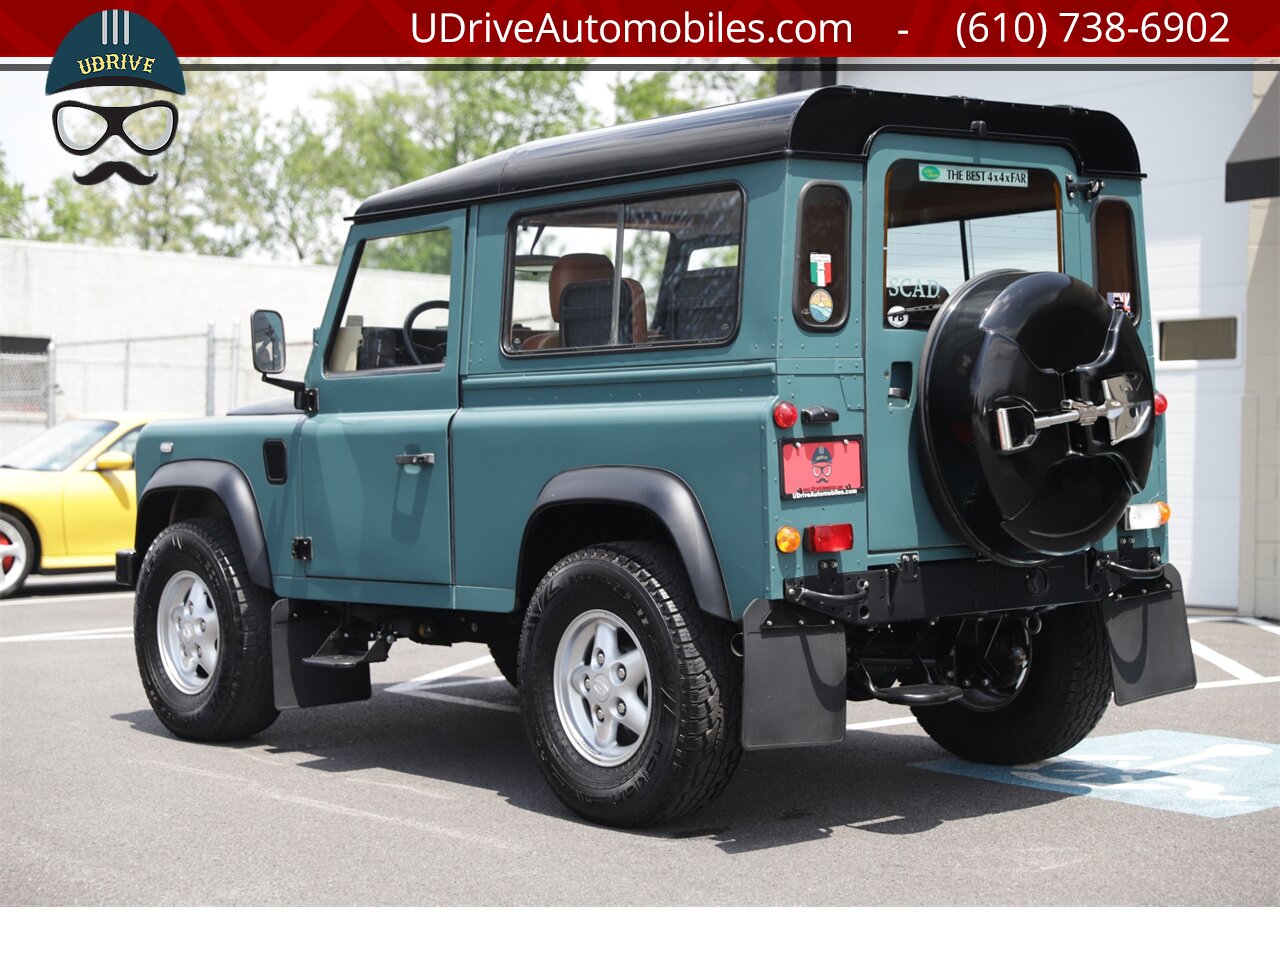 1986 Land Rover Defender 90 D90 4.0L V8 5 Speed Manual New Interior  $25k Recent Engine Build - Photo 26 - West Chester, PA 19382